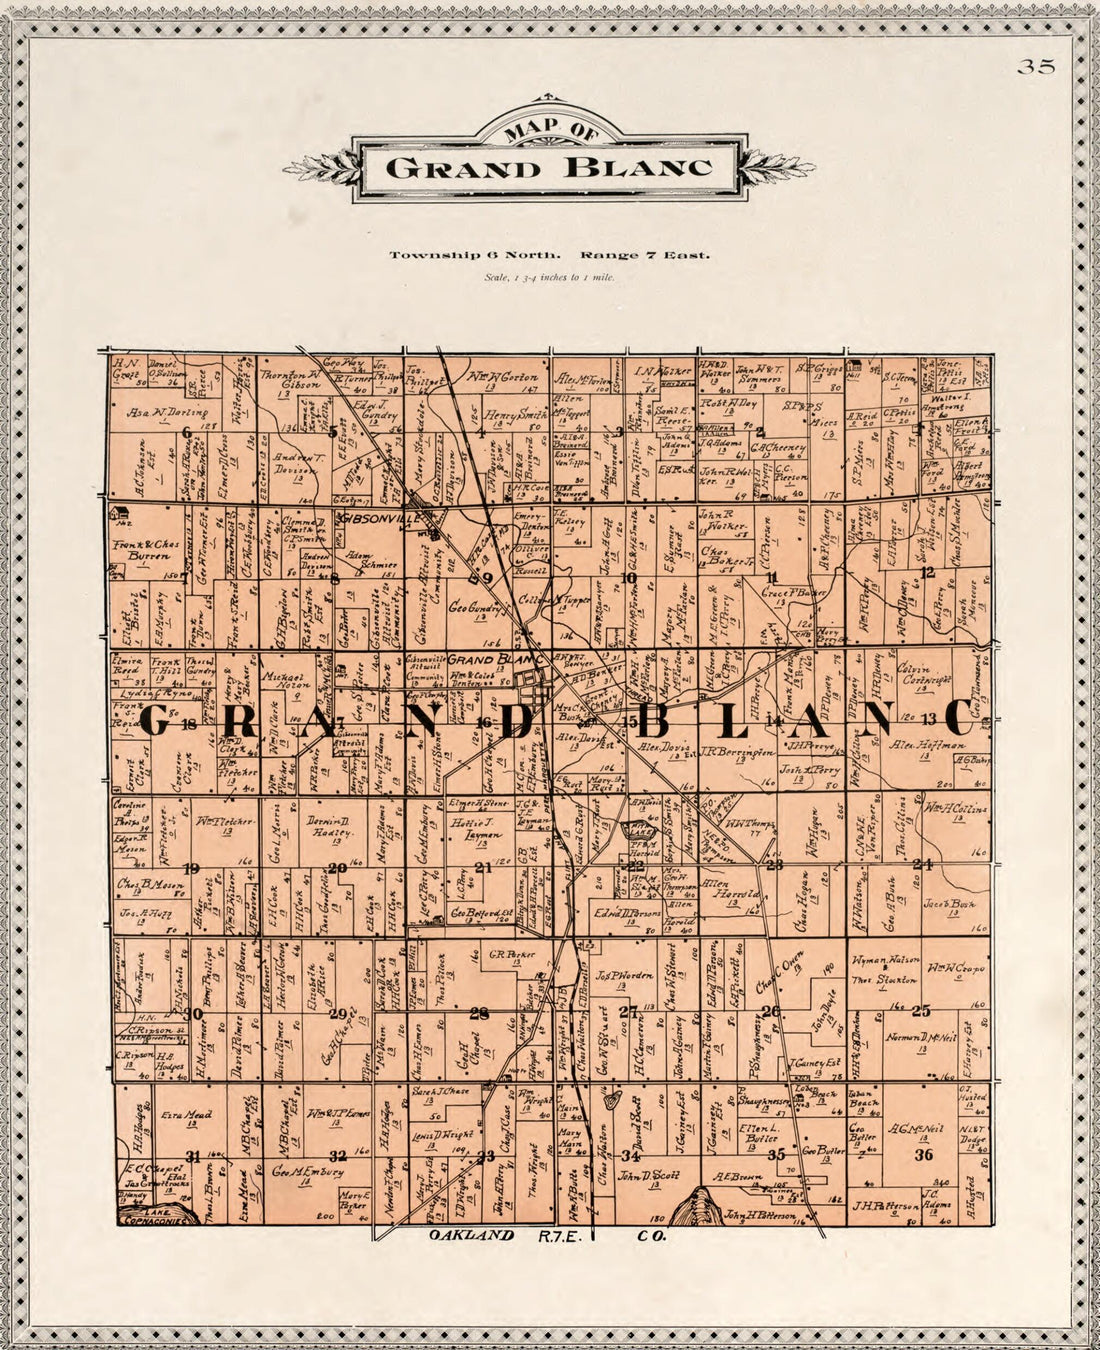 This old map of Map of Grand Blanc from Atlas of Genesee County, Michigan from 1899 was created by Homer A. Day in 1899